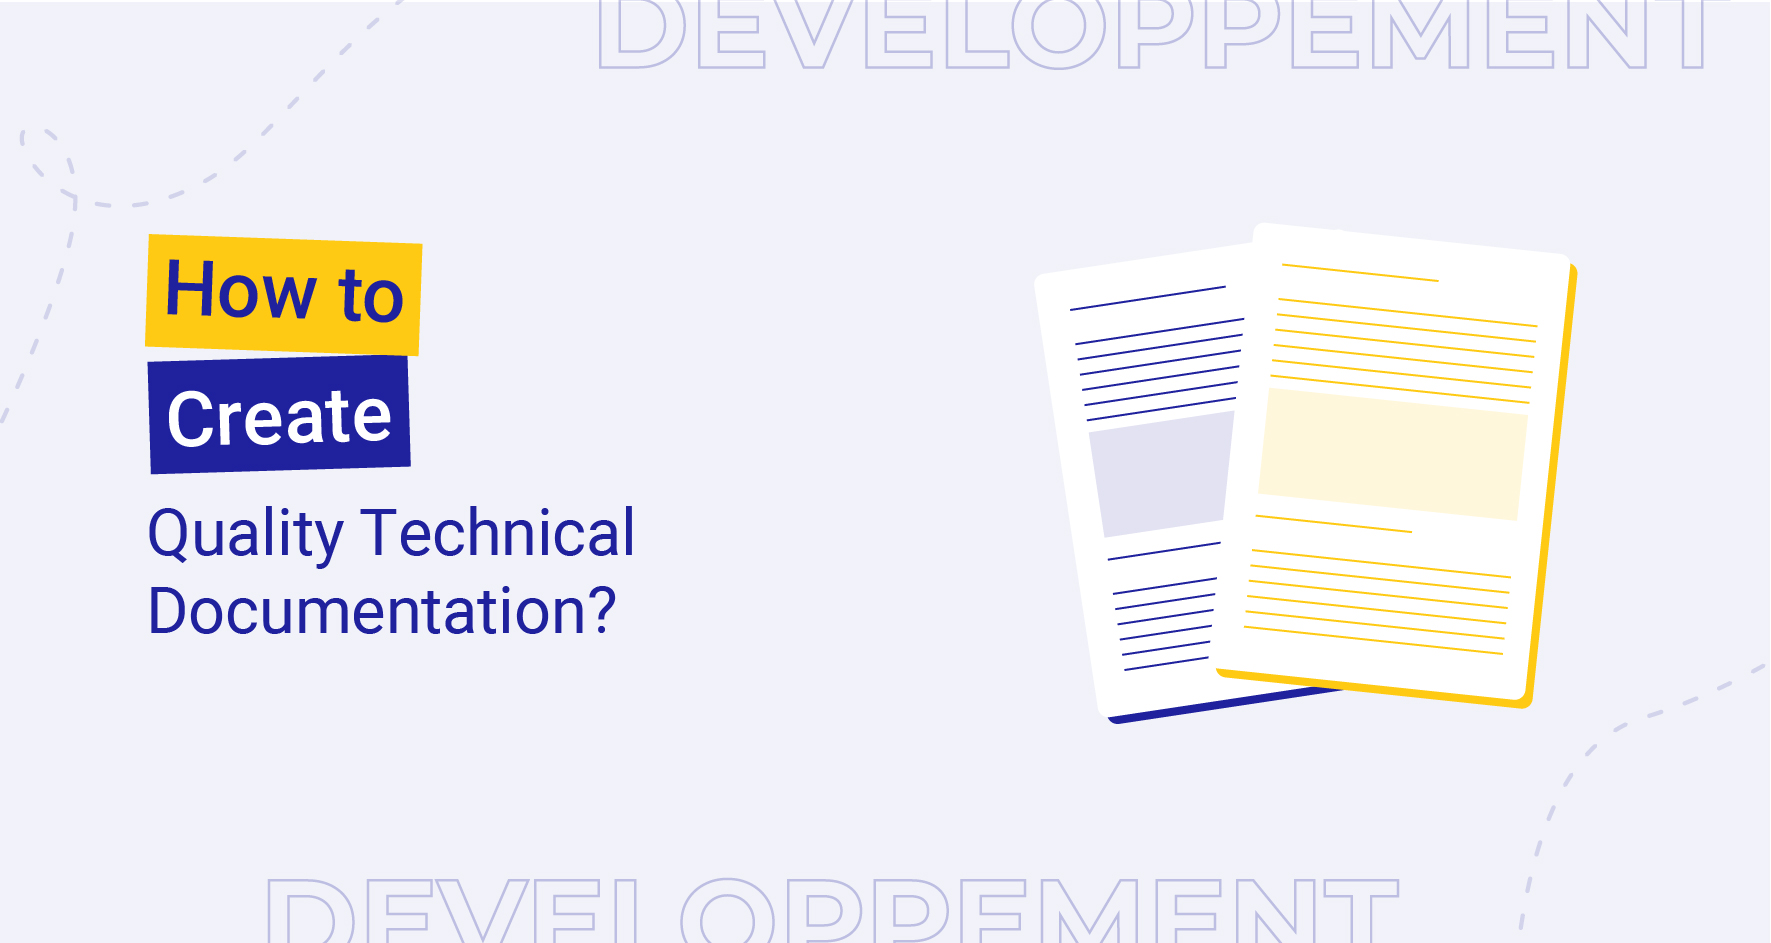 How to Create Quality Technical Documentation